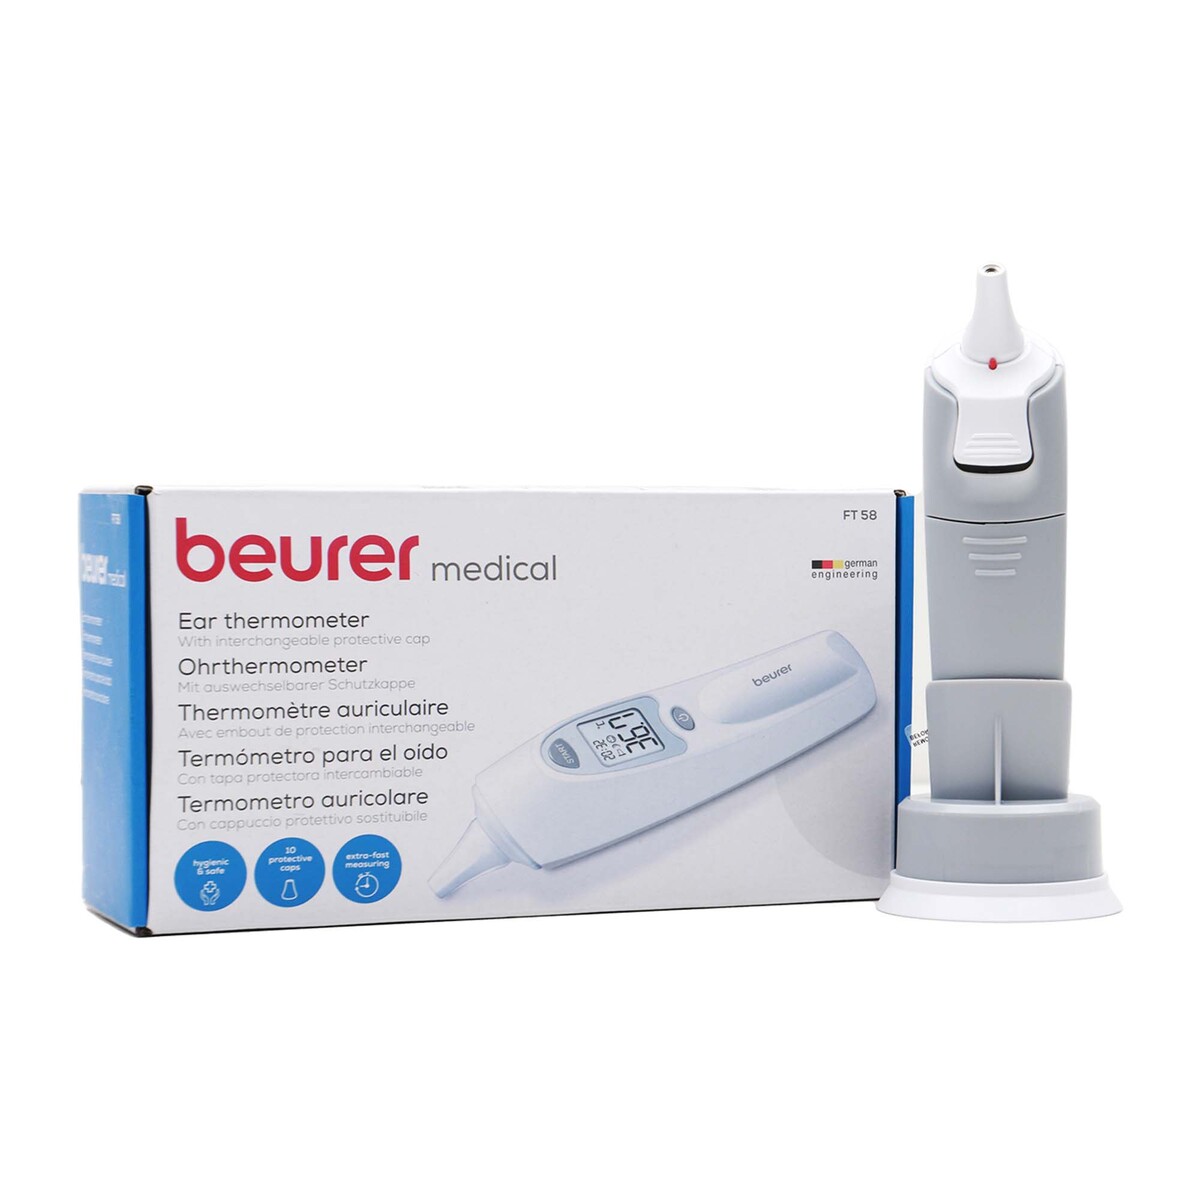 Beurer Ear Thermometer FT58